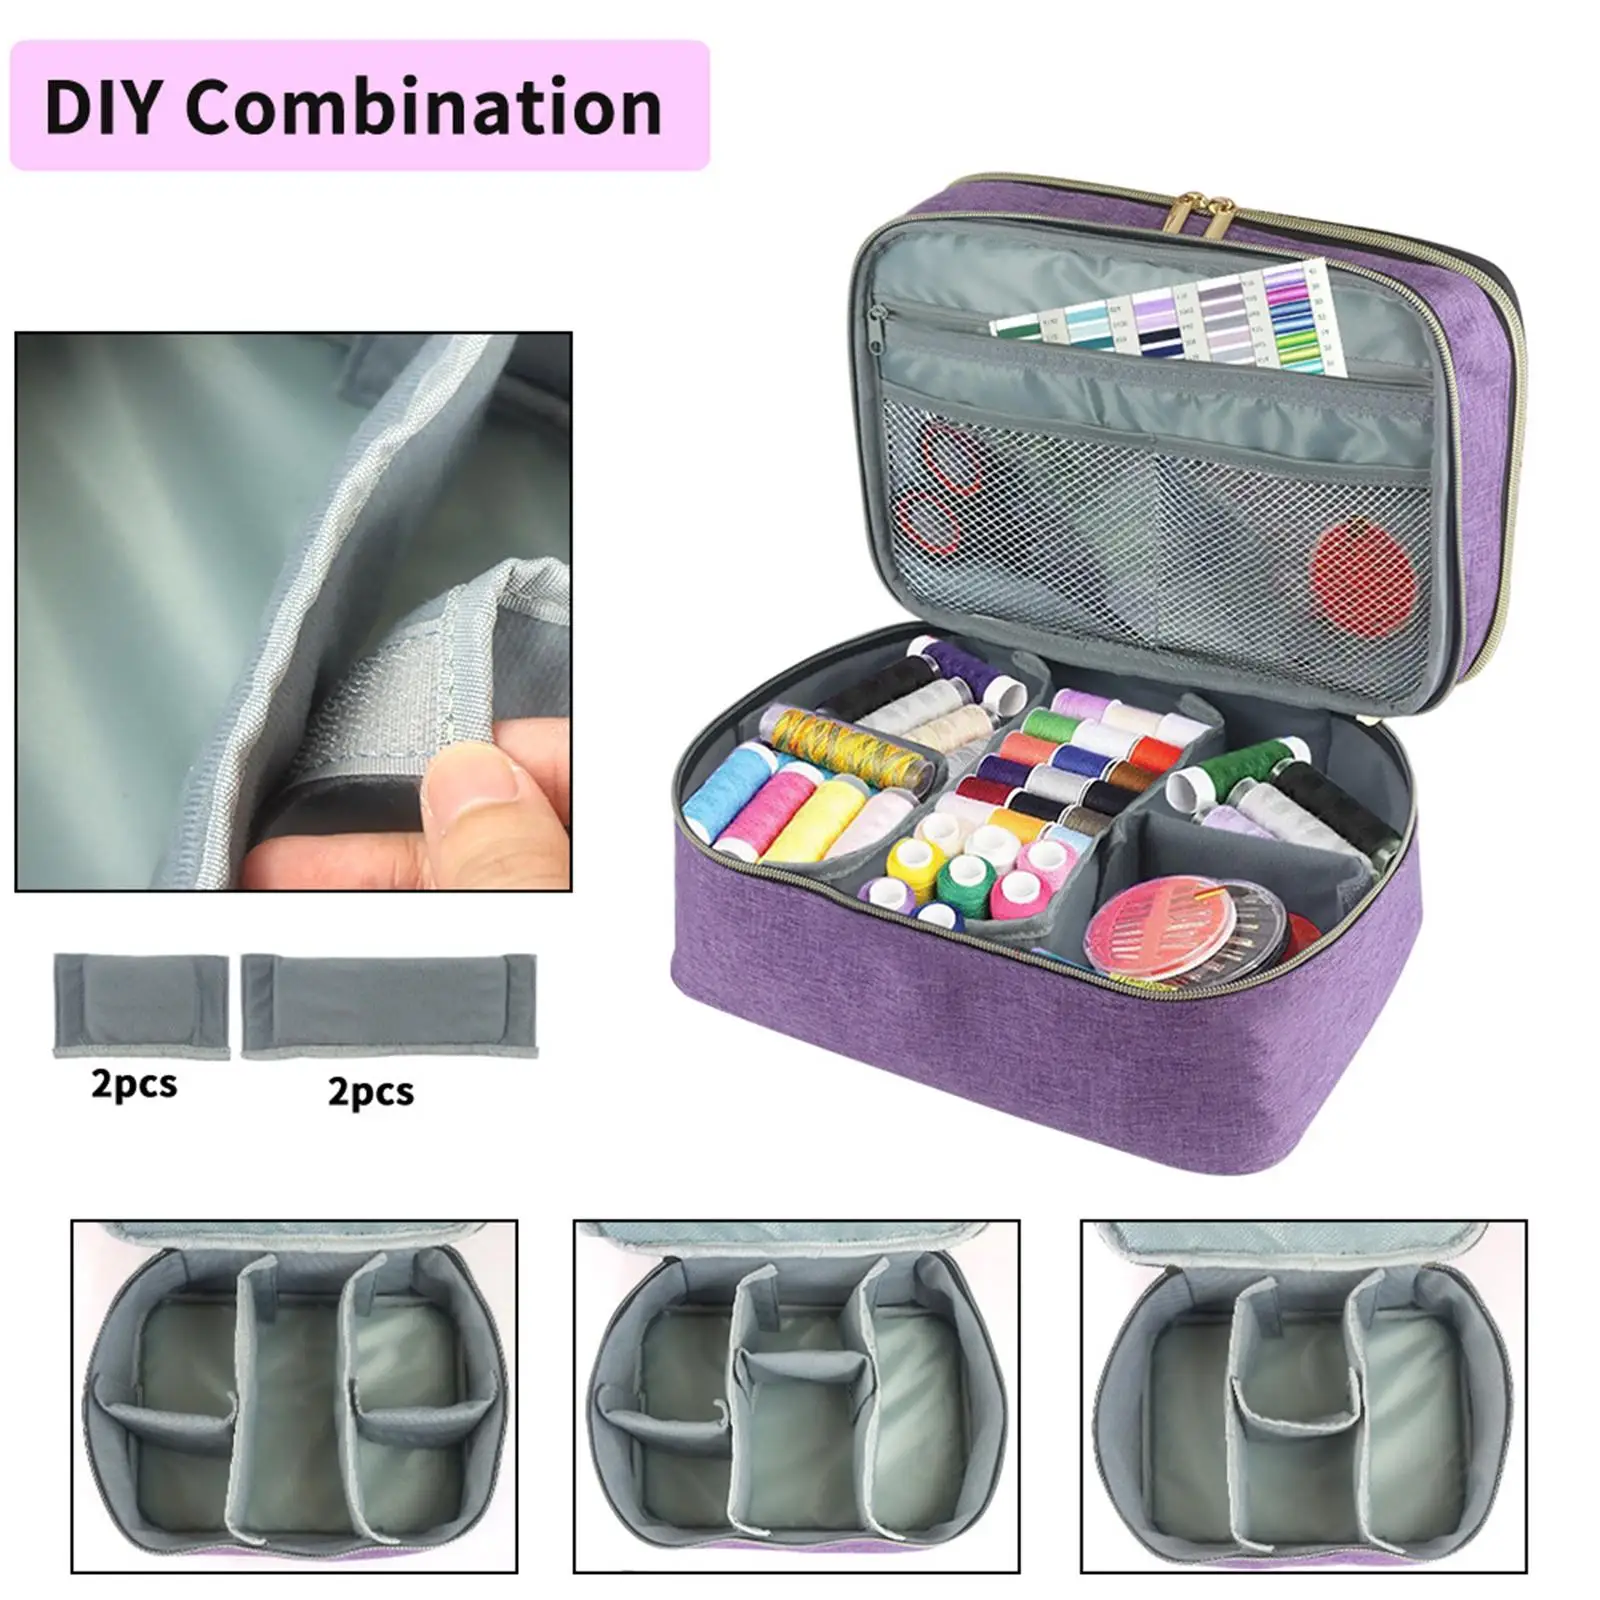 Sewing Storage Organizer Portable for Pins Thread Buttons